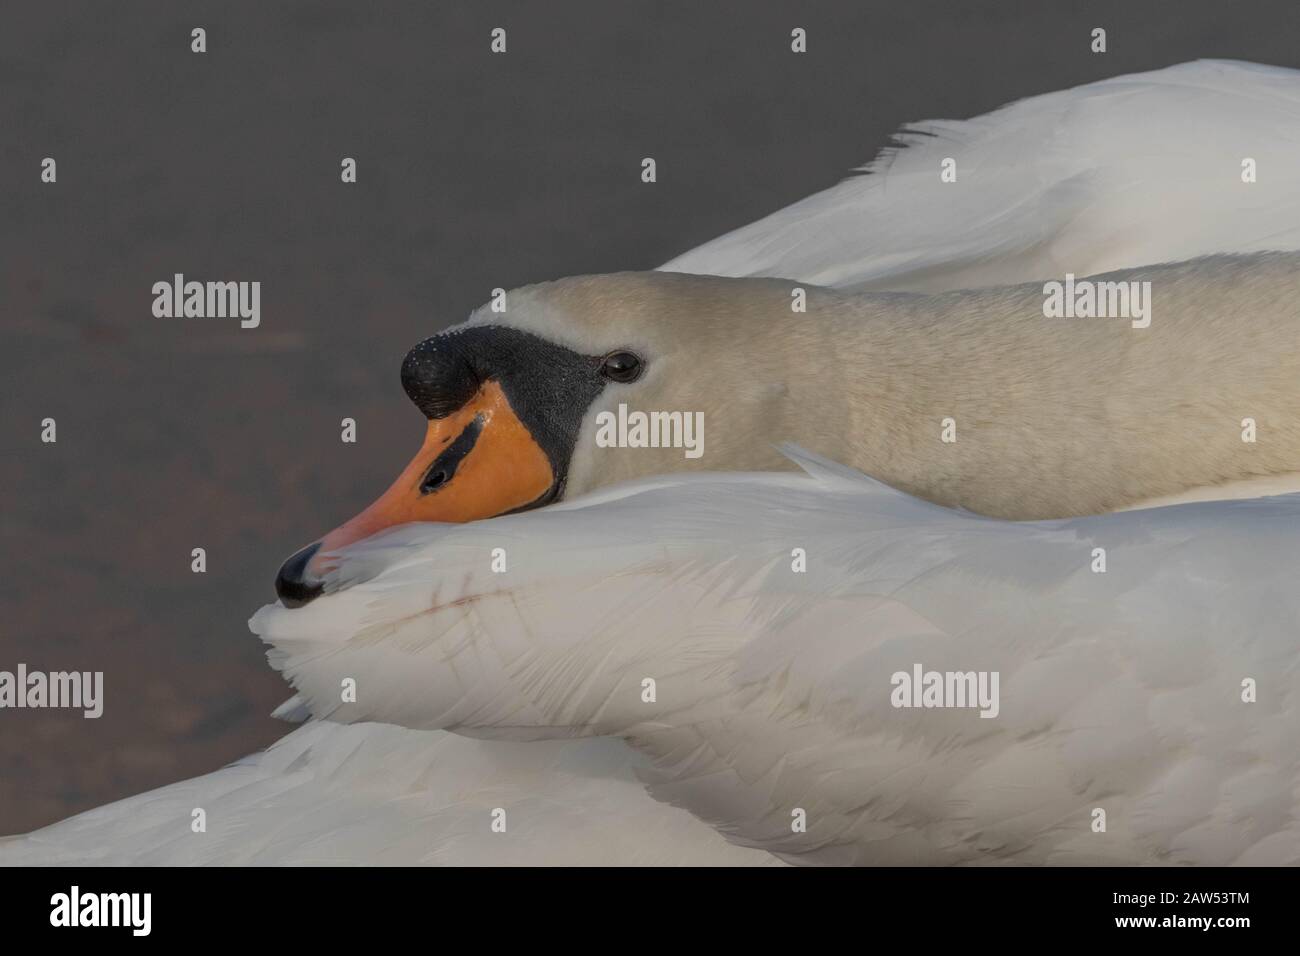 A mute swan head close up. The swan has turned it's neck over it's body during preening. Stock Photo